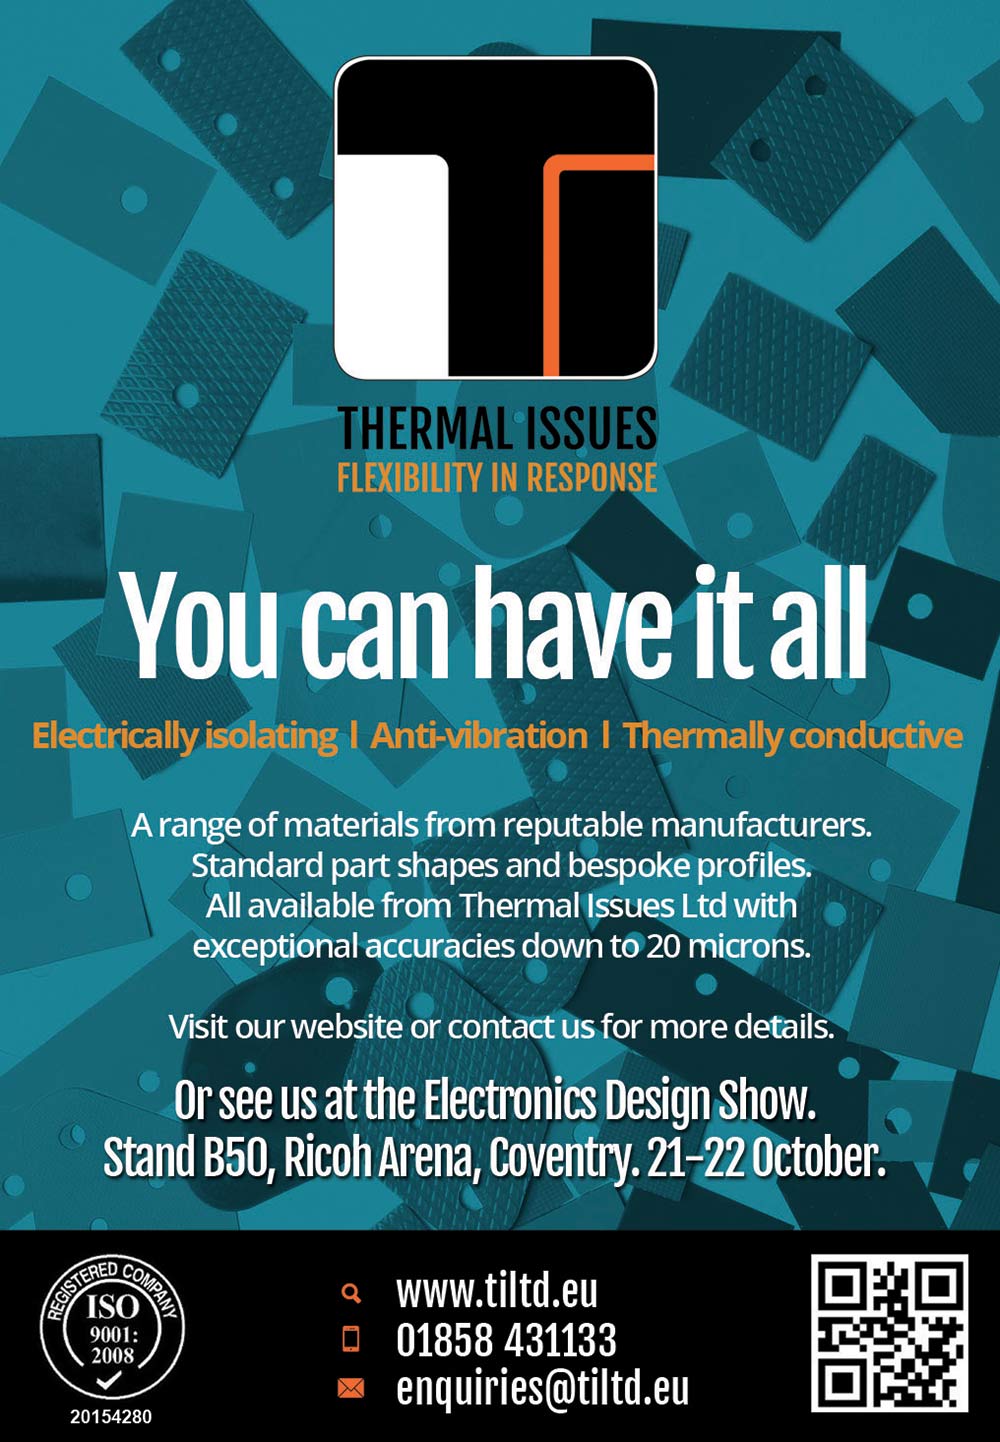 Thermal Issues quarter-page advertisement